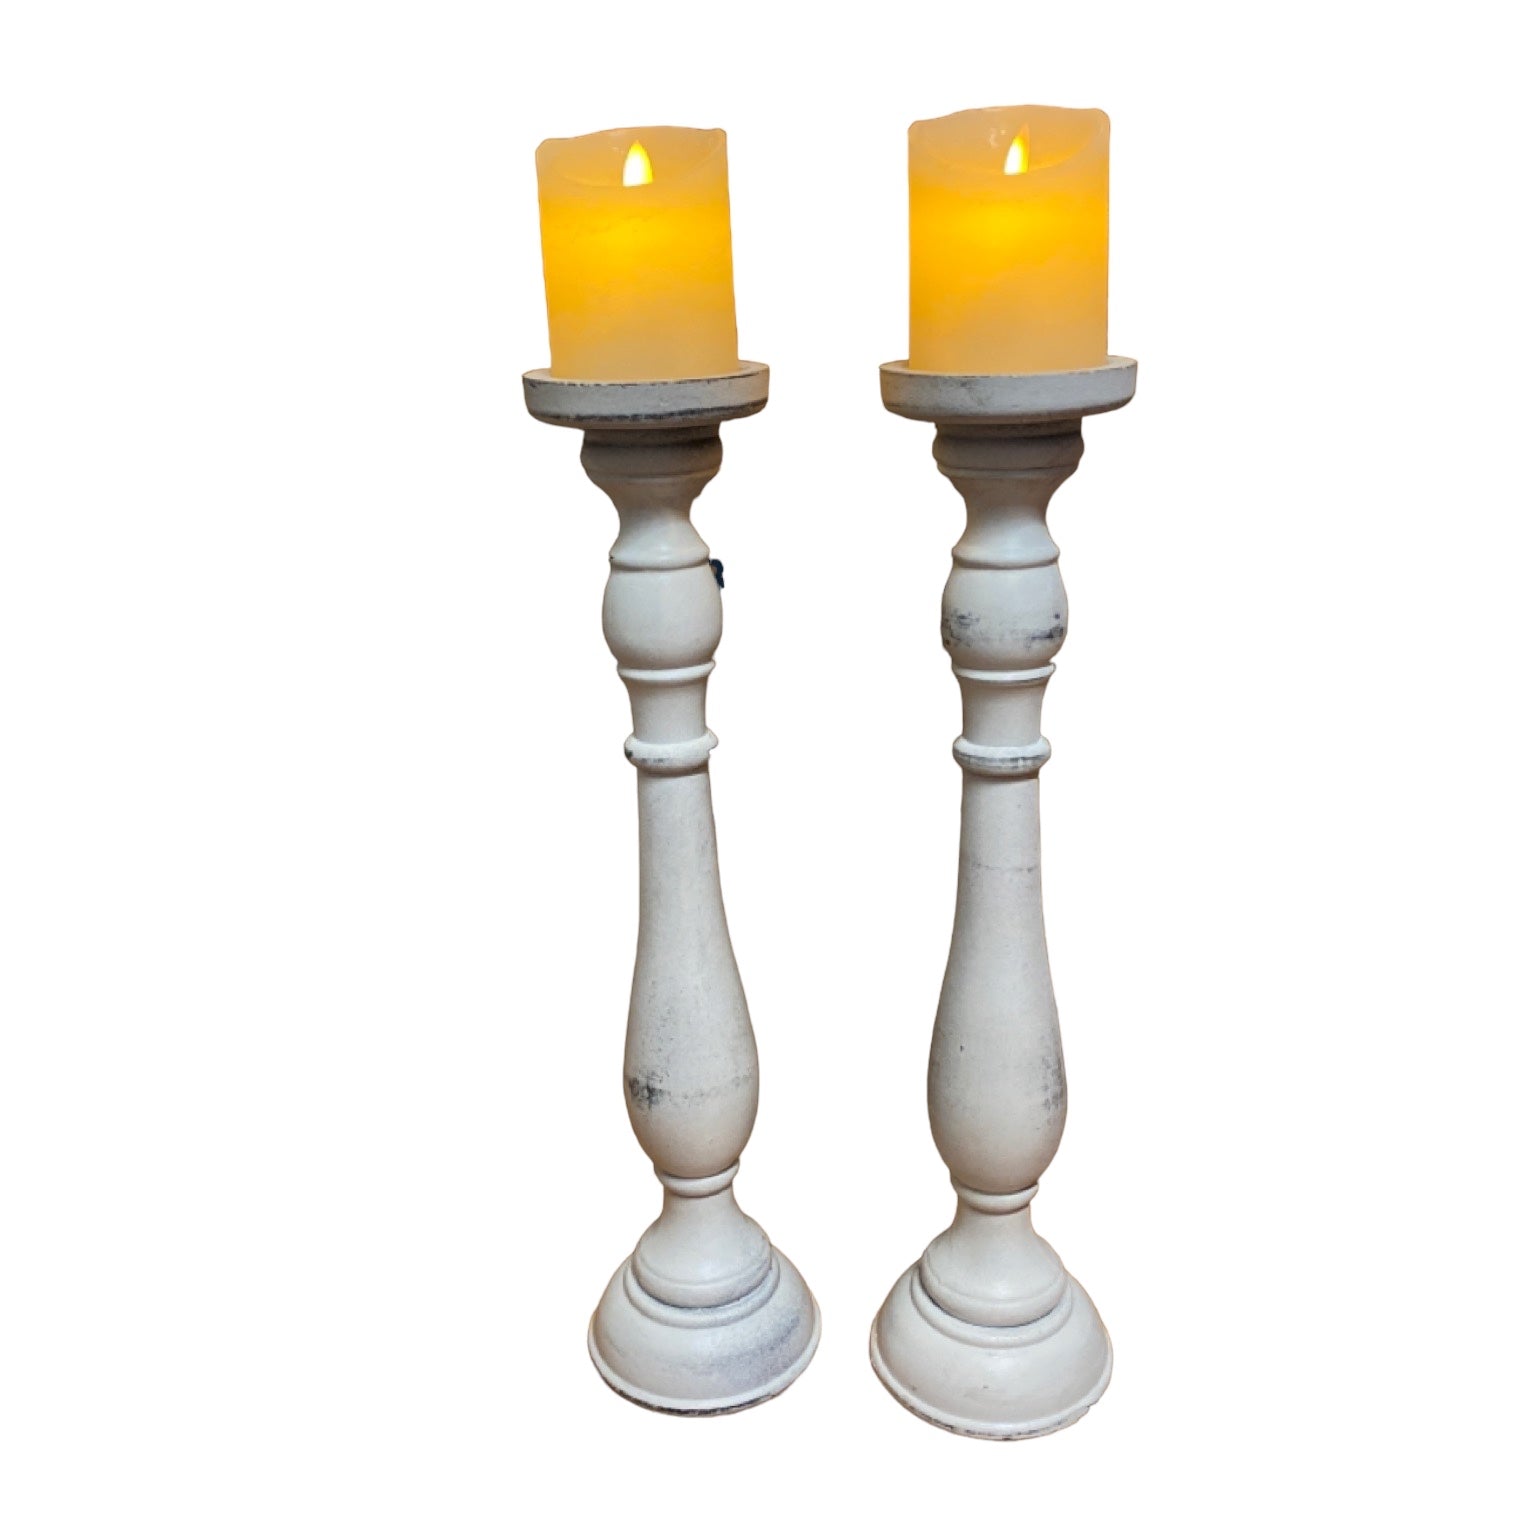 Candle Holder Pillar French Provincial Set of 2 White - The Renmy Store Homewares & Gifts 